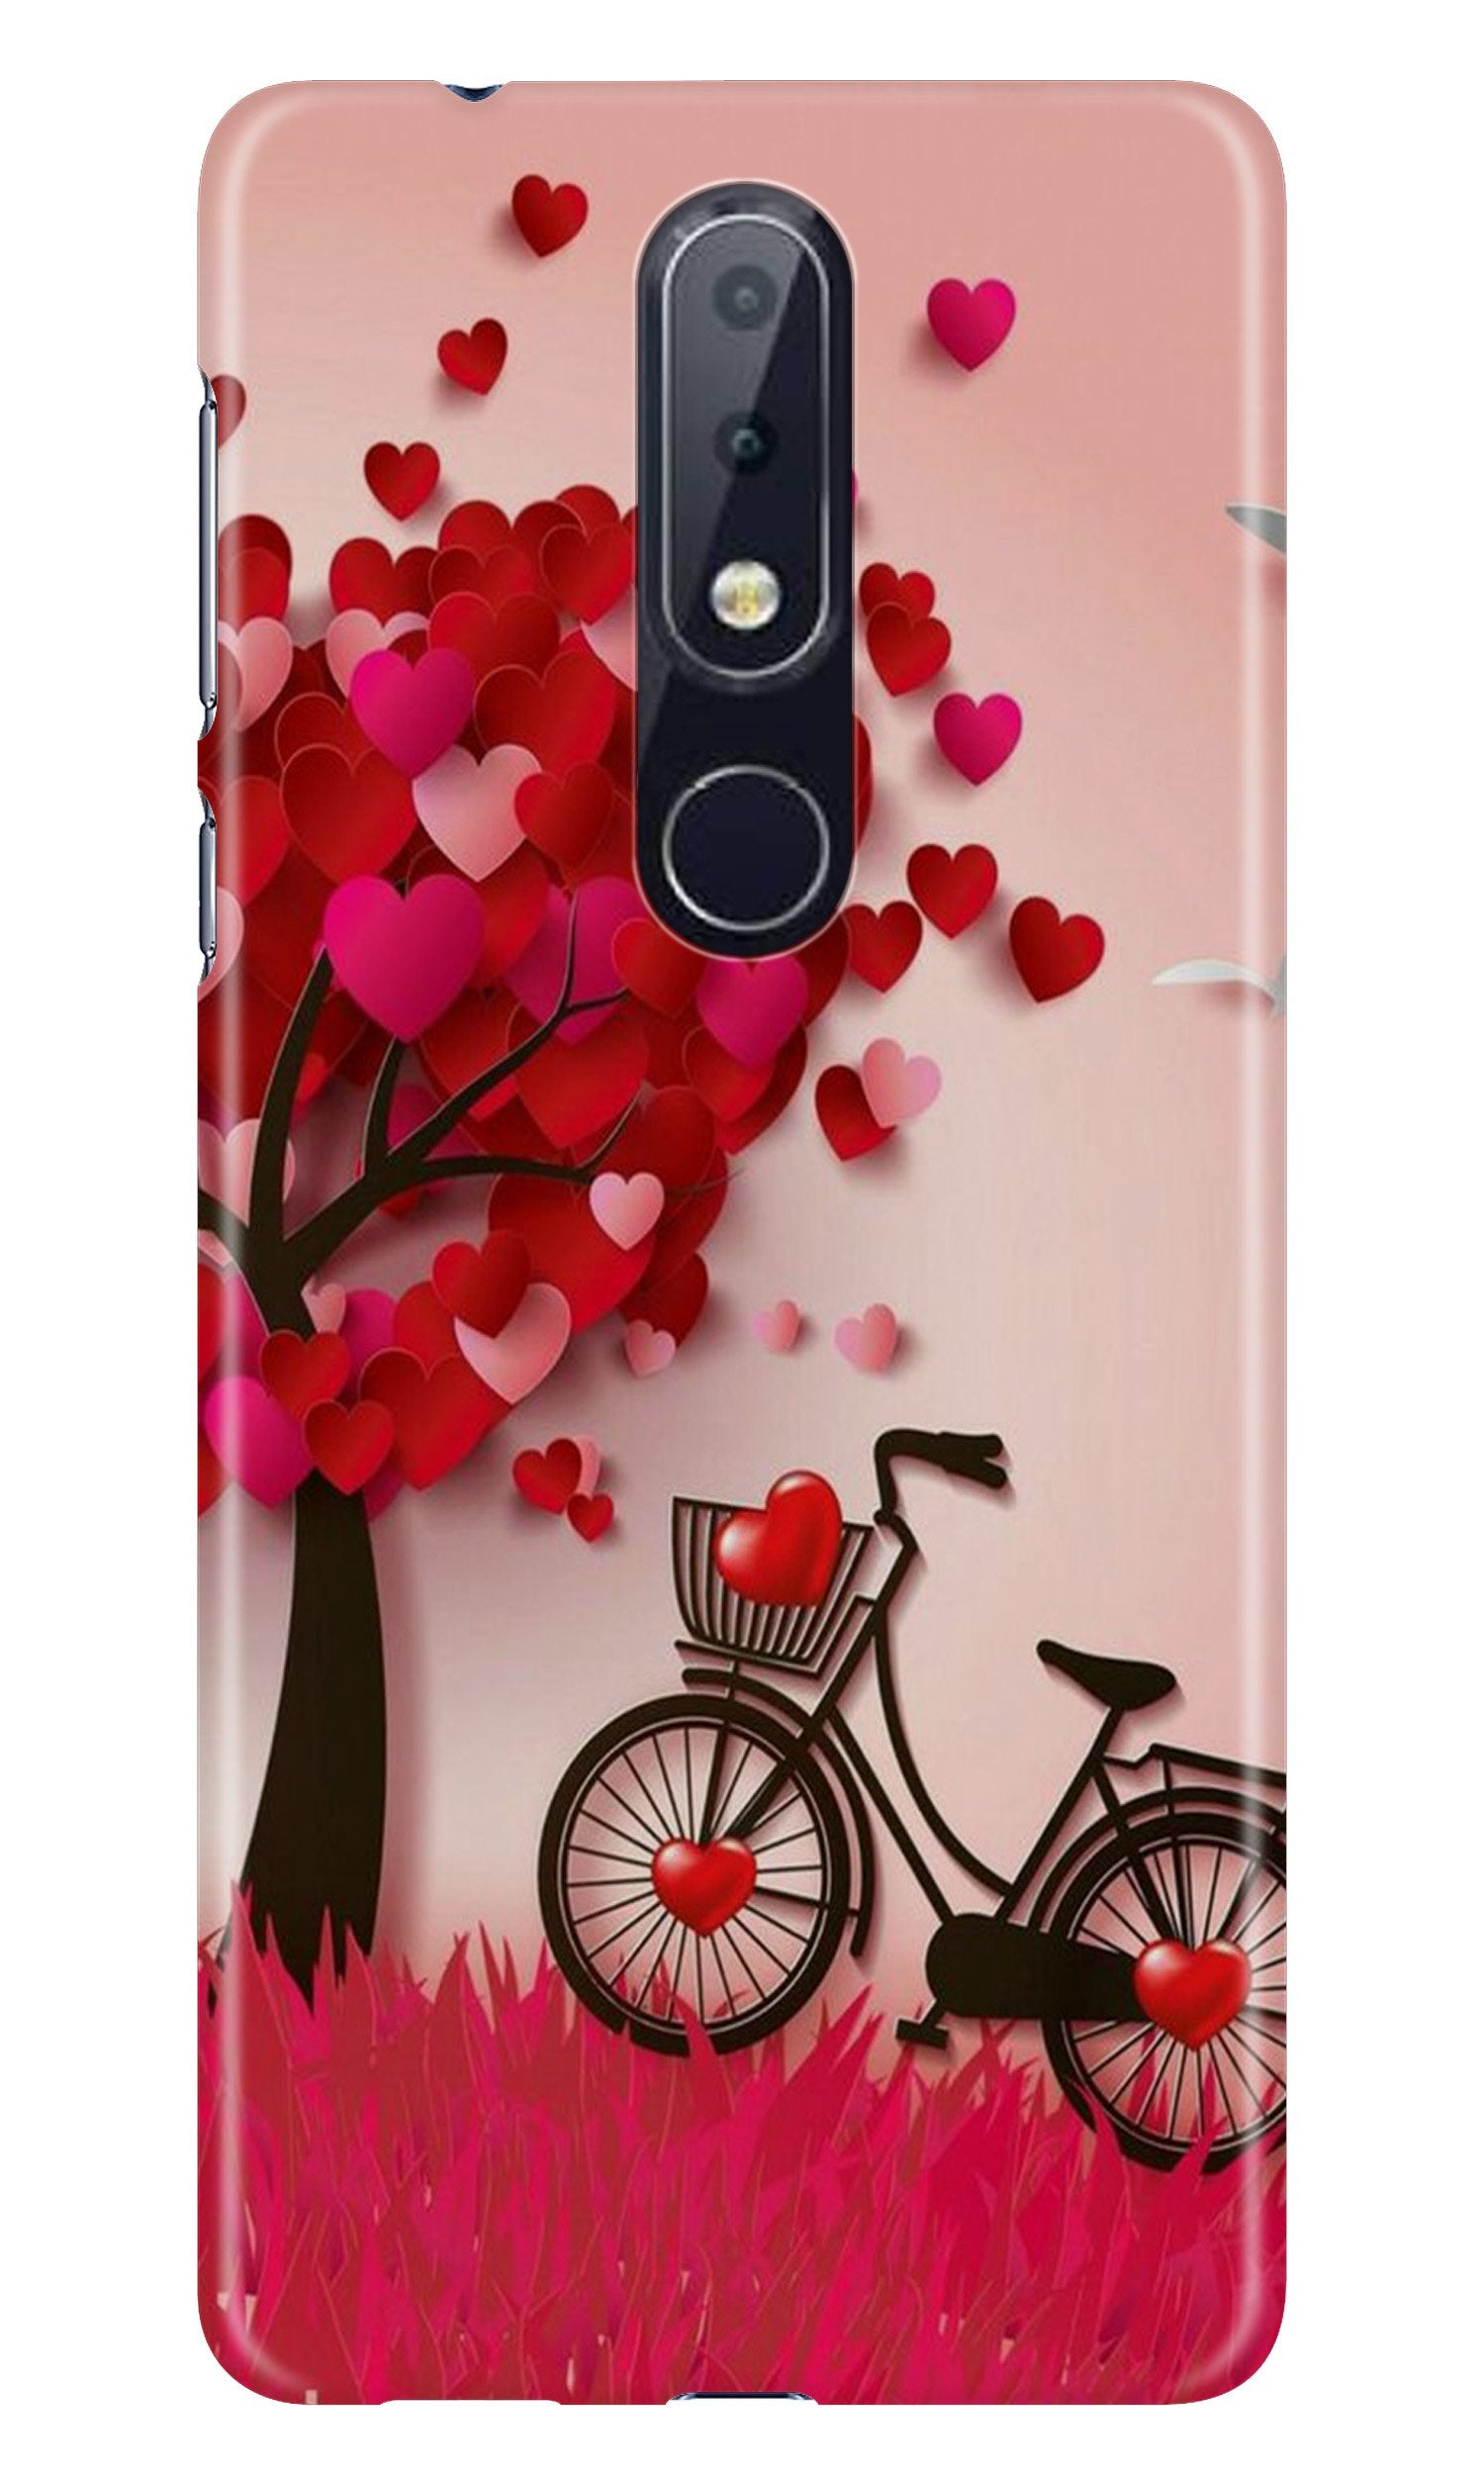 Red Heart Cycle Case for Nokia 6.1 Plus (Design No. 222)